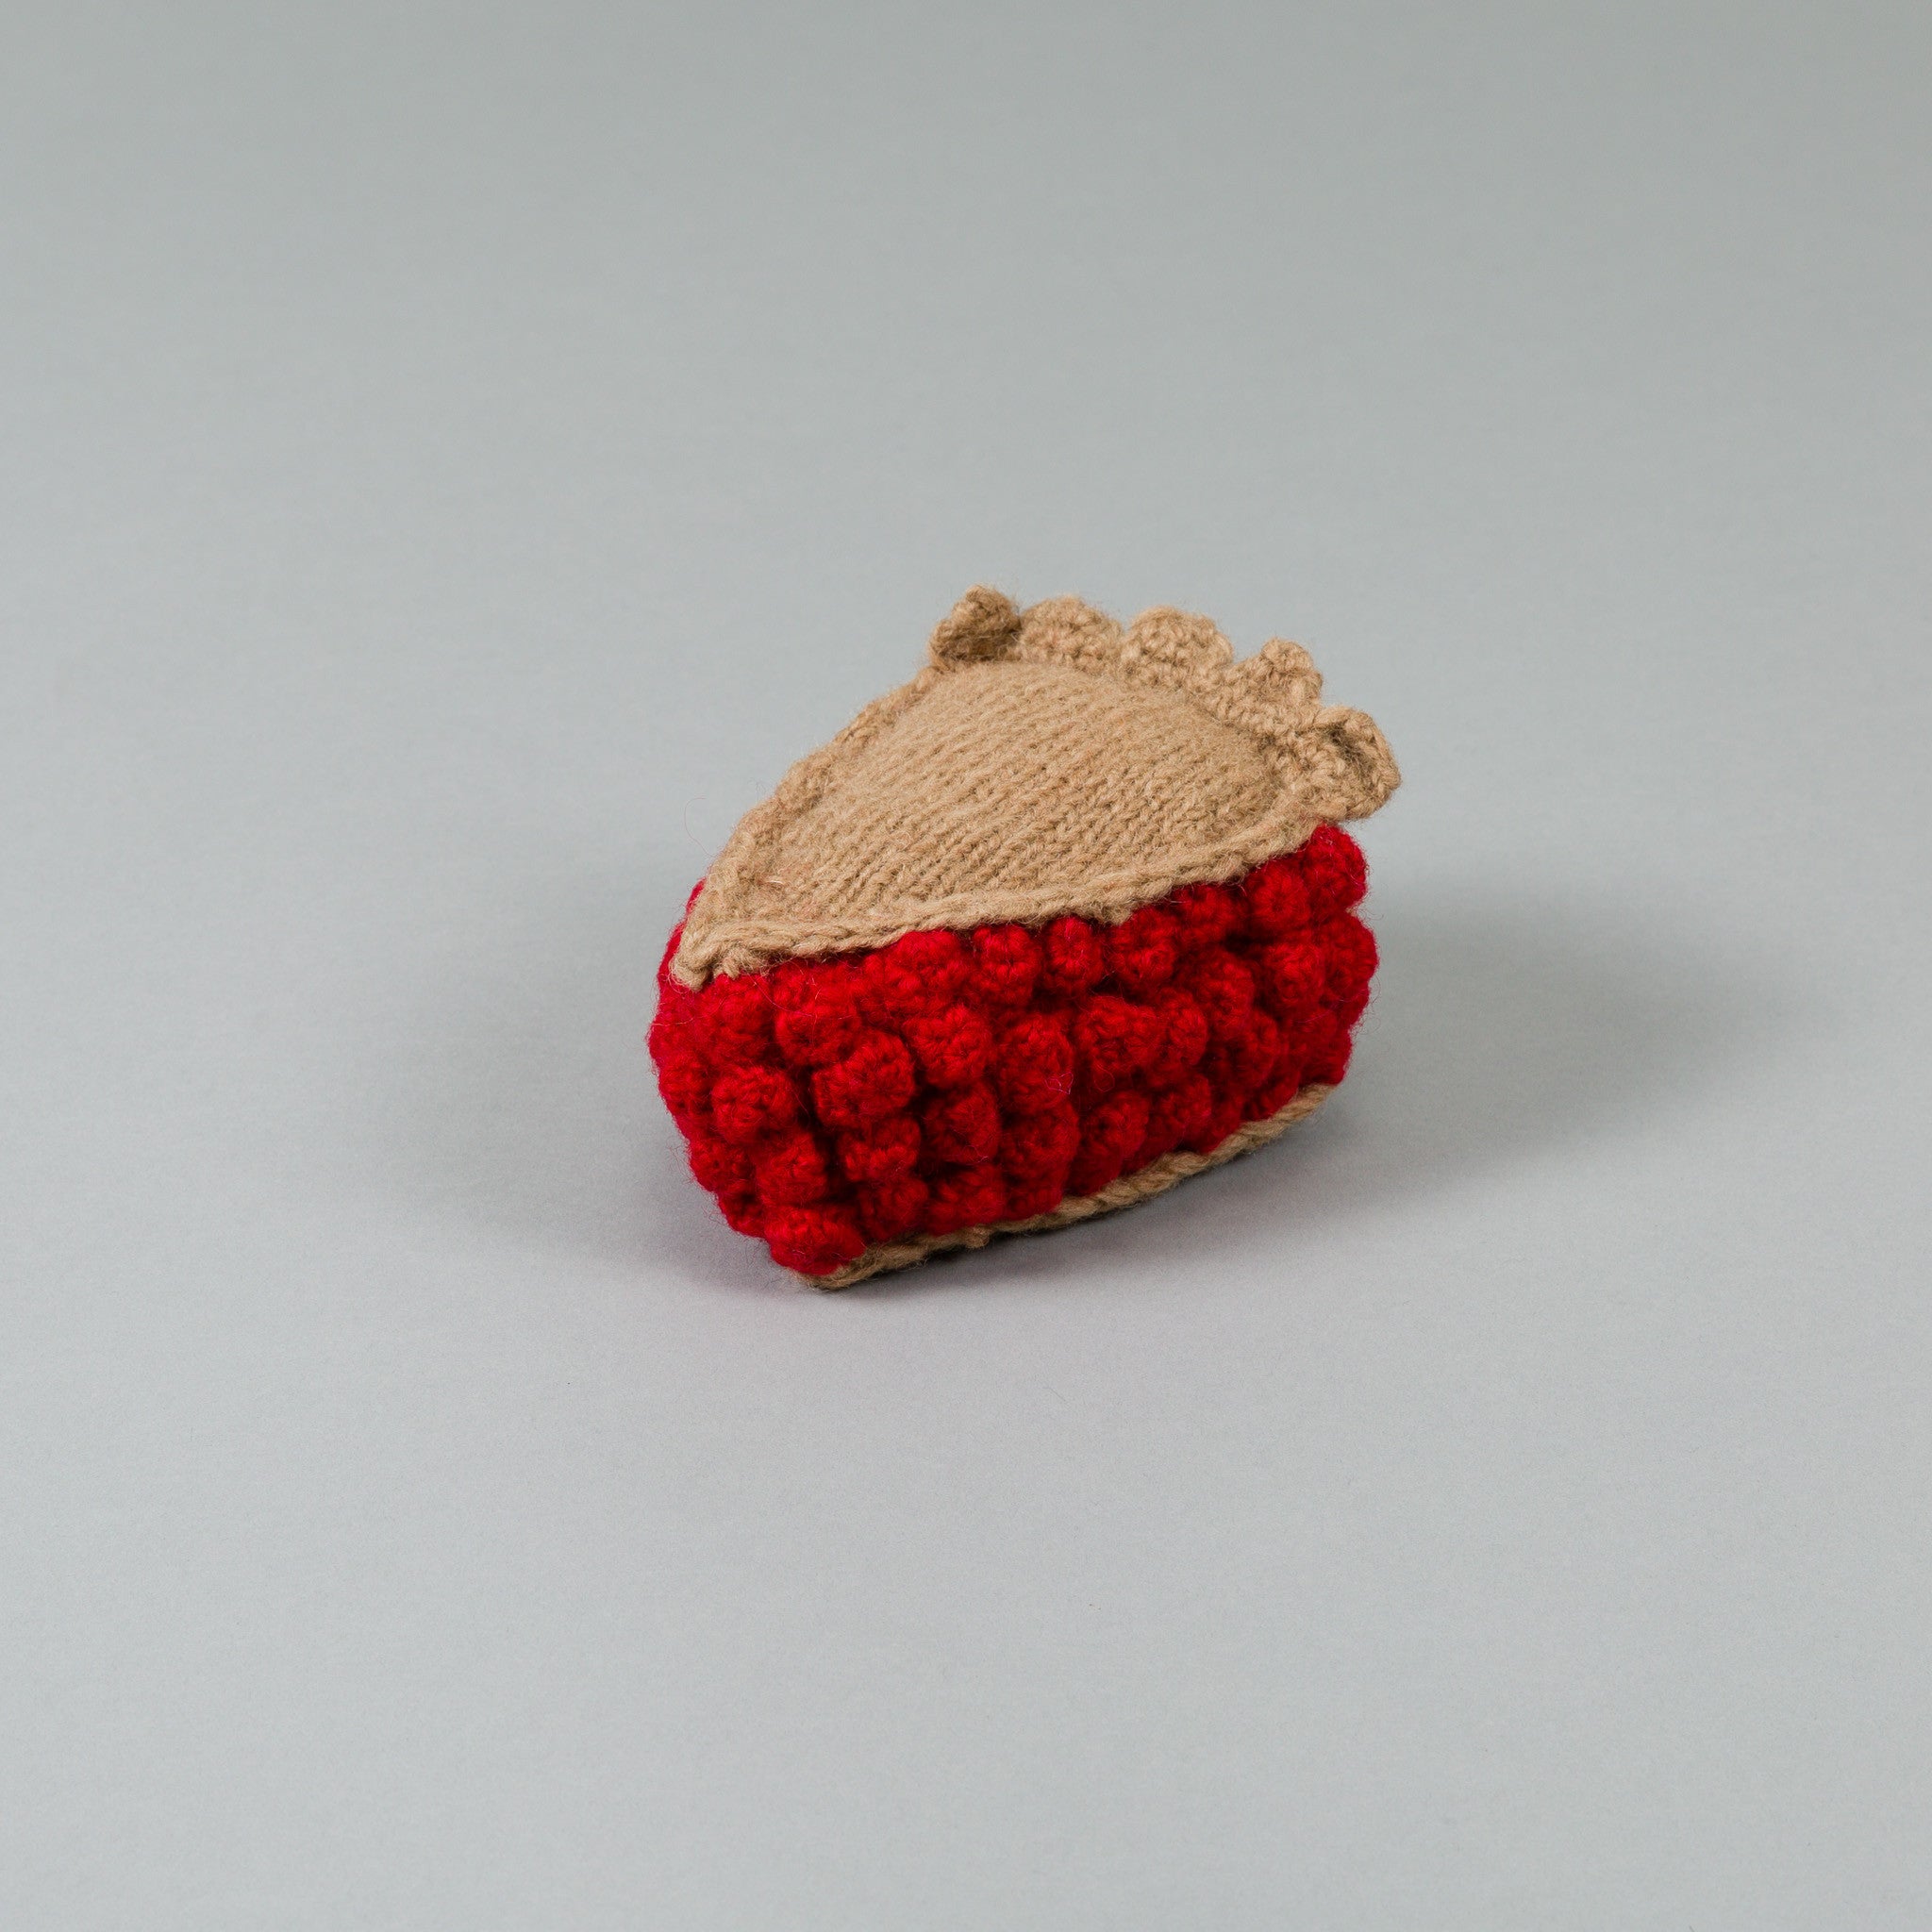 Dog Toy: Hand Knitted Cherry Pie